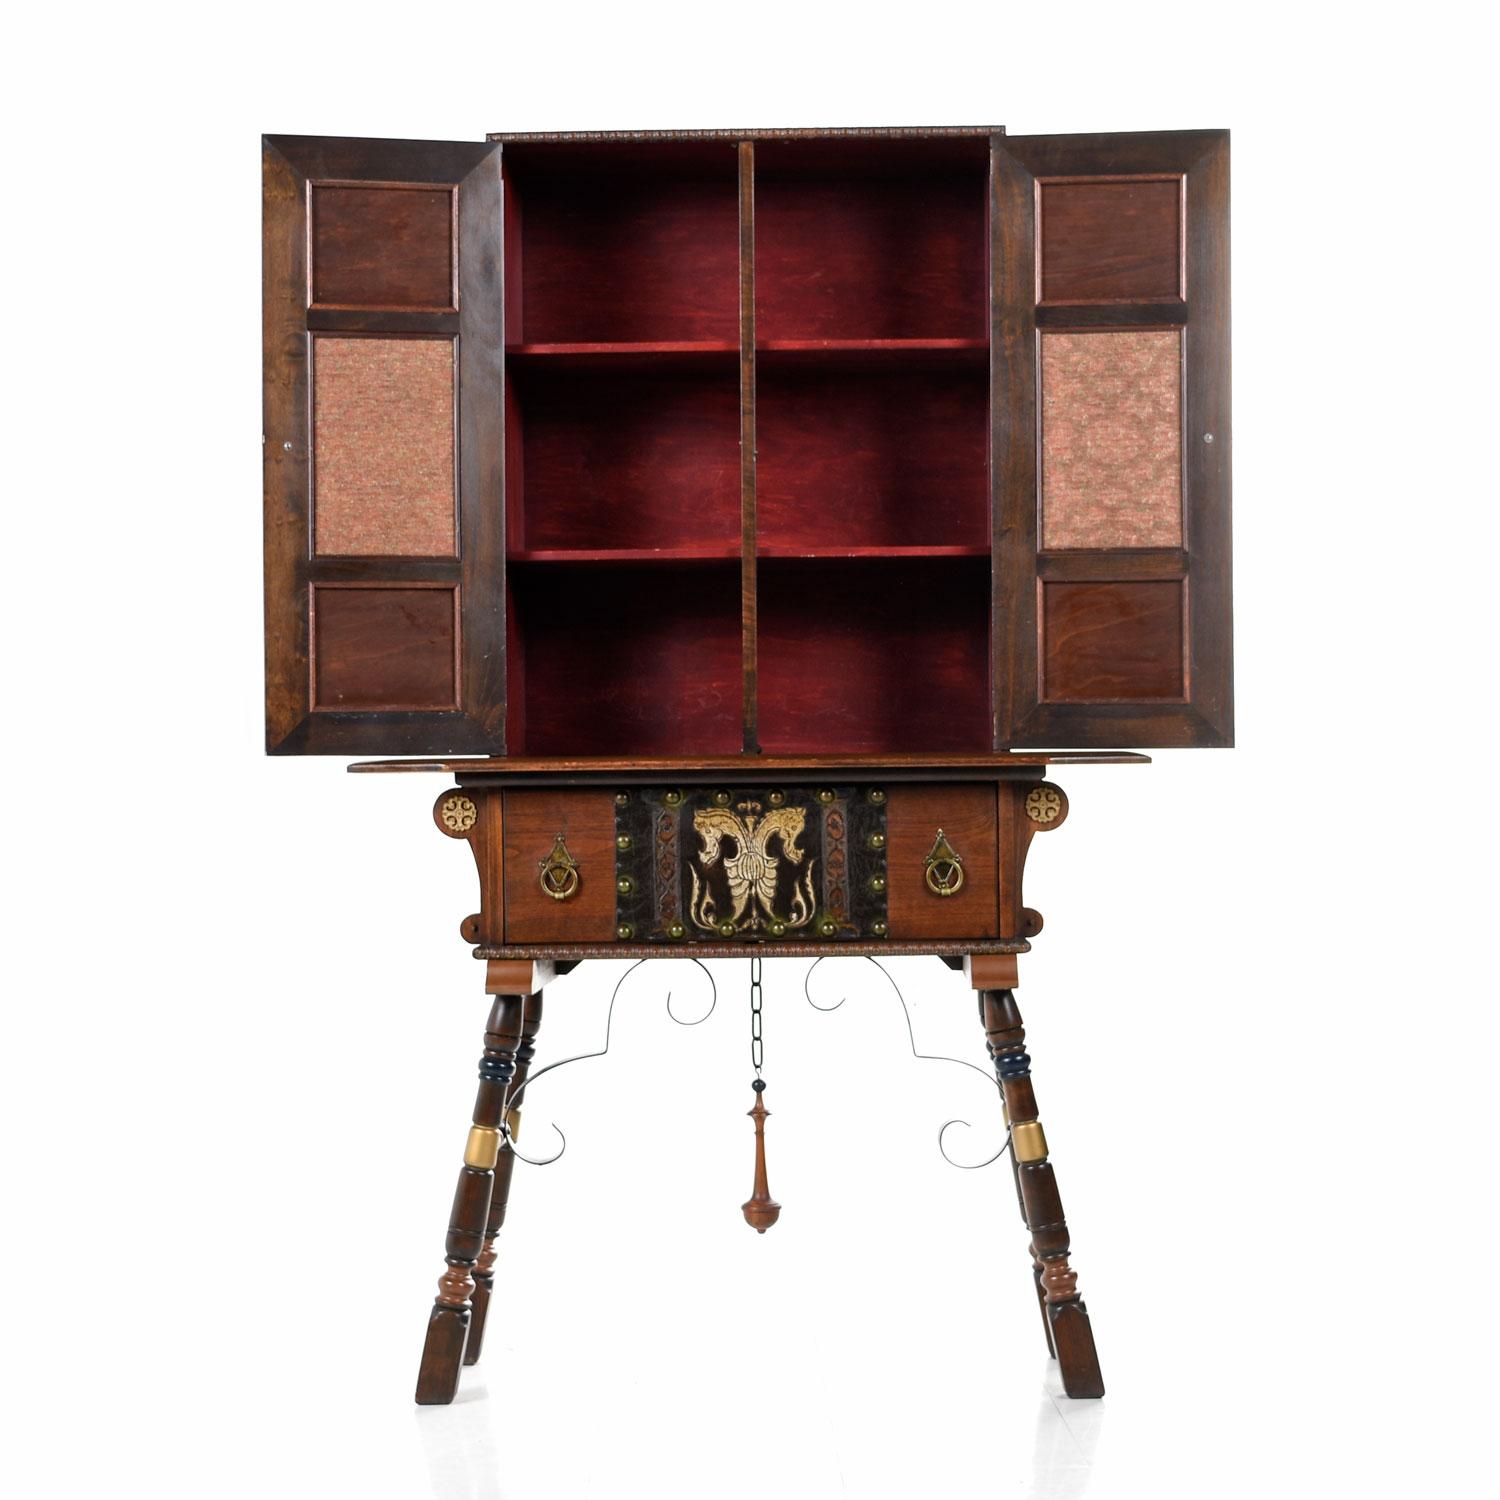 Medieval Gothic Revival Style Dragon Motif Brass & Leather Accent Mahogany Hutch Cabinet